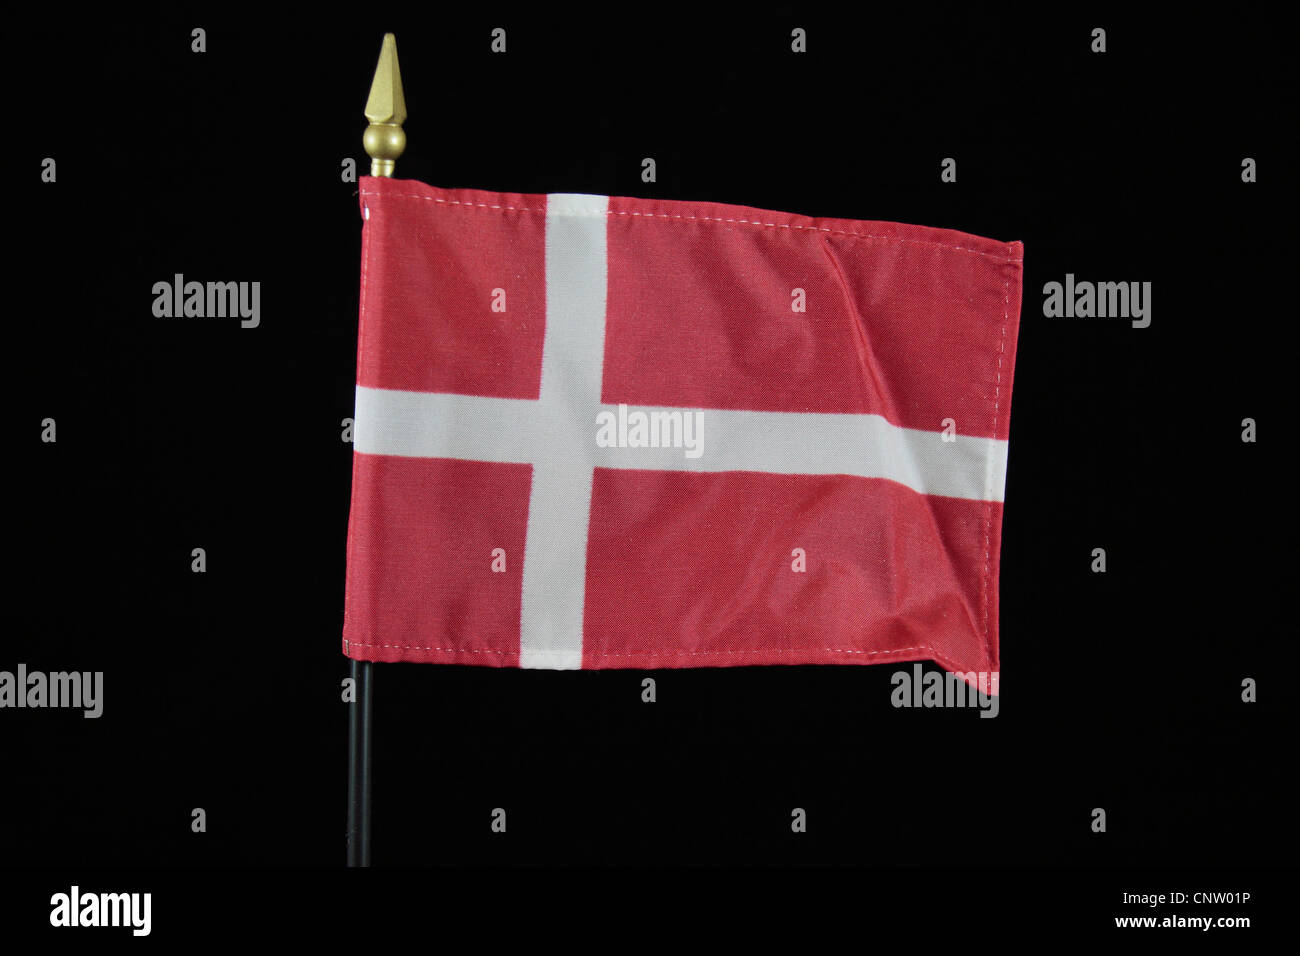 The national flag of the Kingdom of Denmark on a black background. Stock Photo